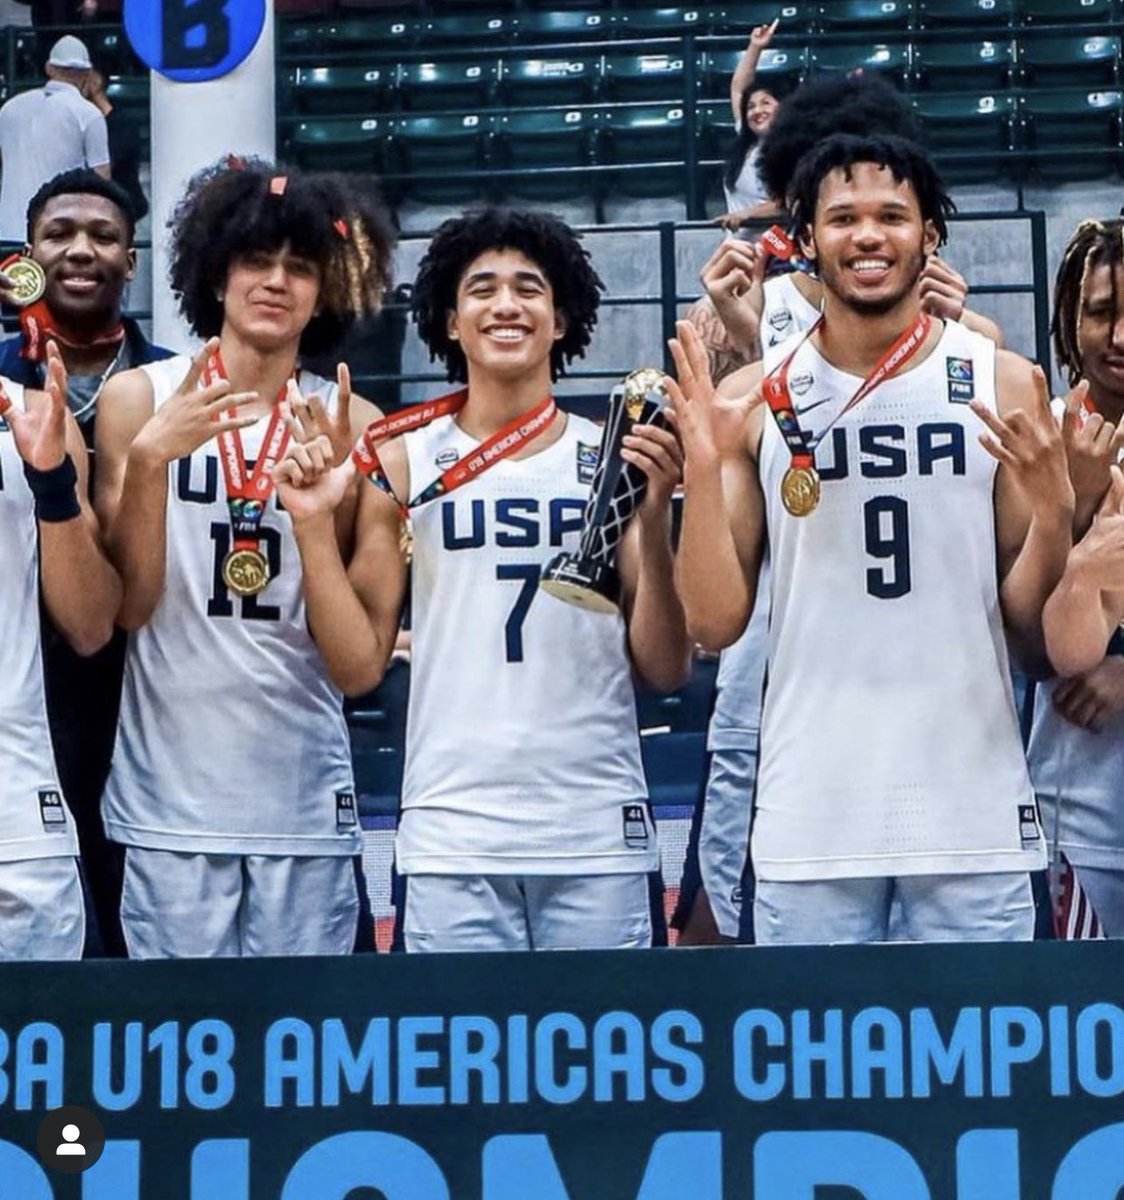 🏅GOLD MEDAL ALERT🏅 Congratulations to our @J_mccain_24 on winning GOLD on the @usabasketball team 🏀 #Cen10 #USA #goldmedal